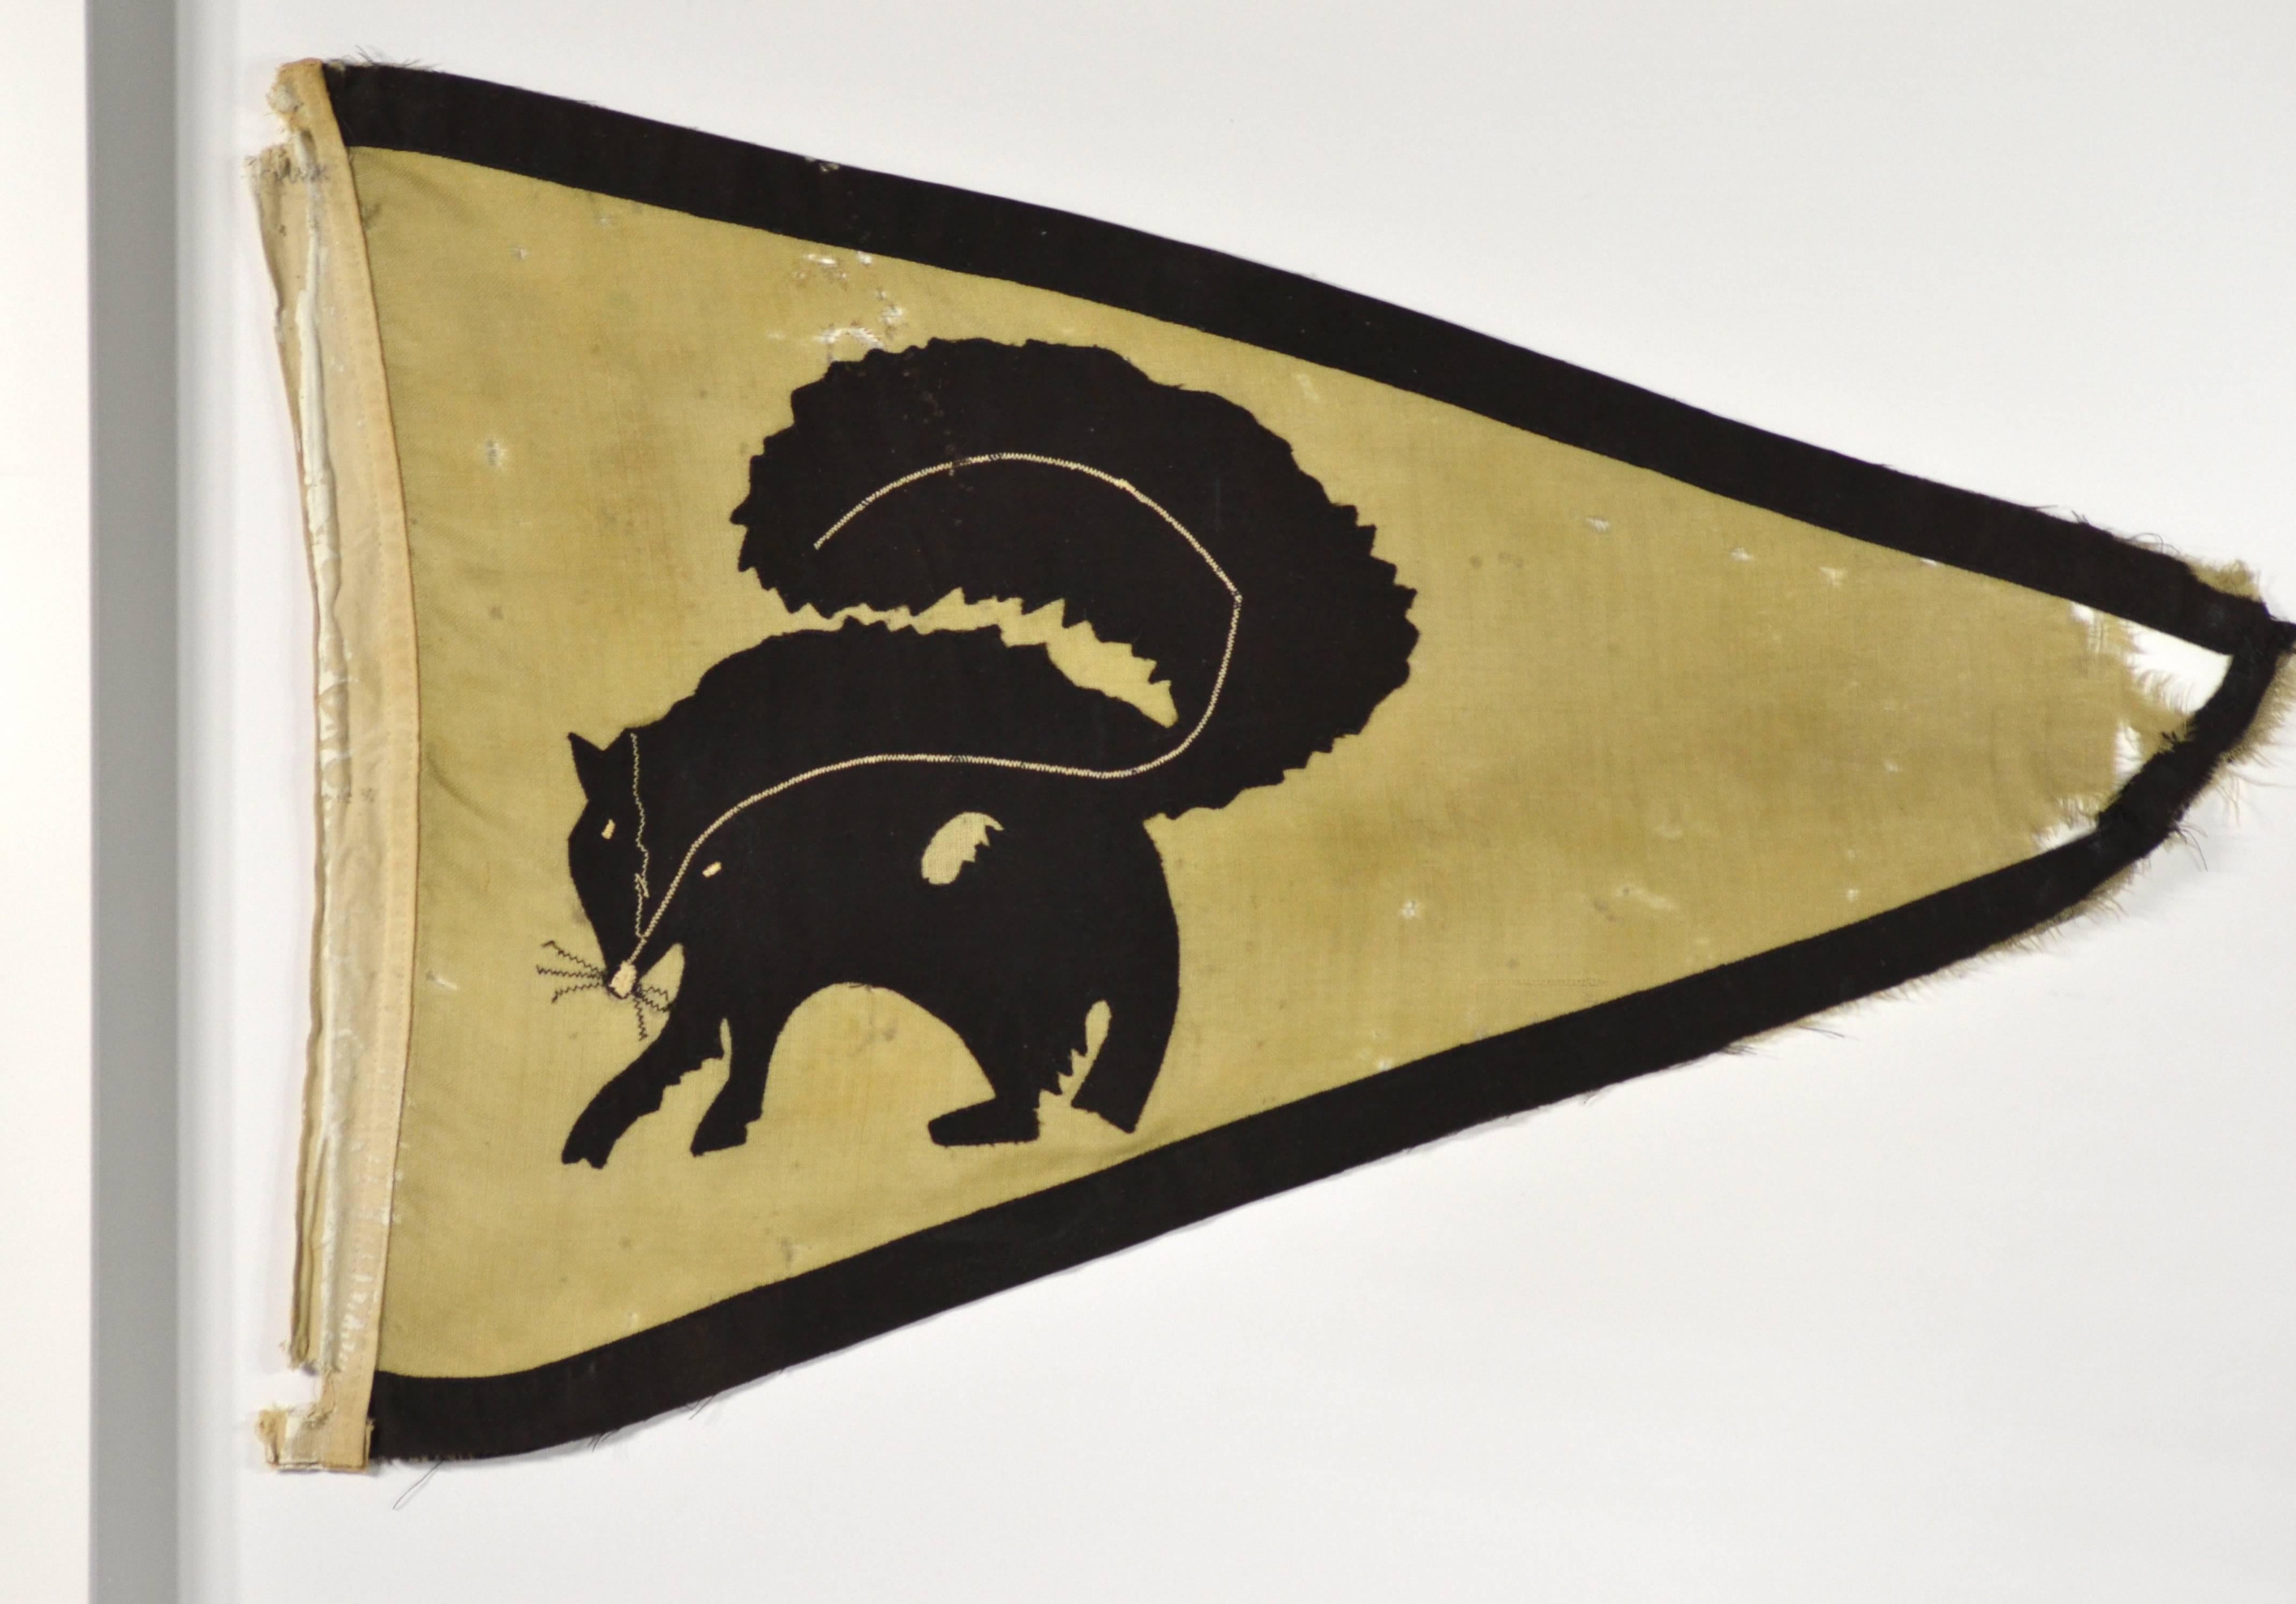 Rare antique hand-sewn fishing tournament flag picturing a skunk. This flag would have been flown at the top of the boats mast as they came into port signifying they were 